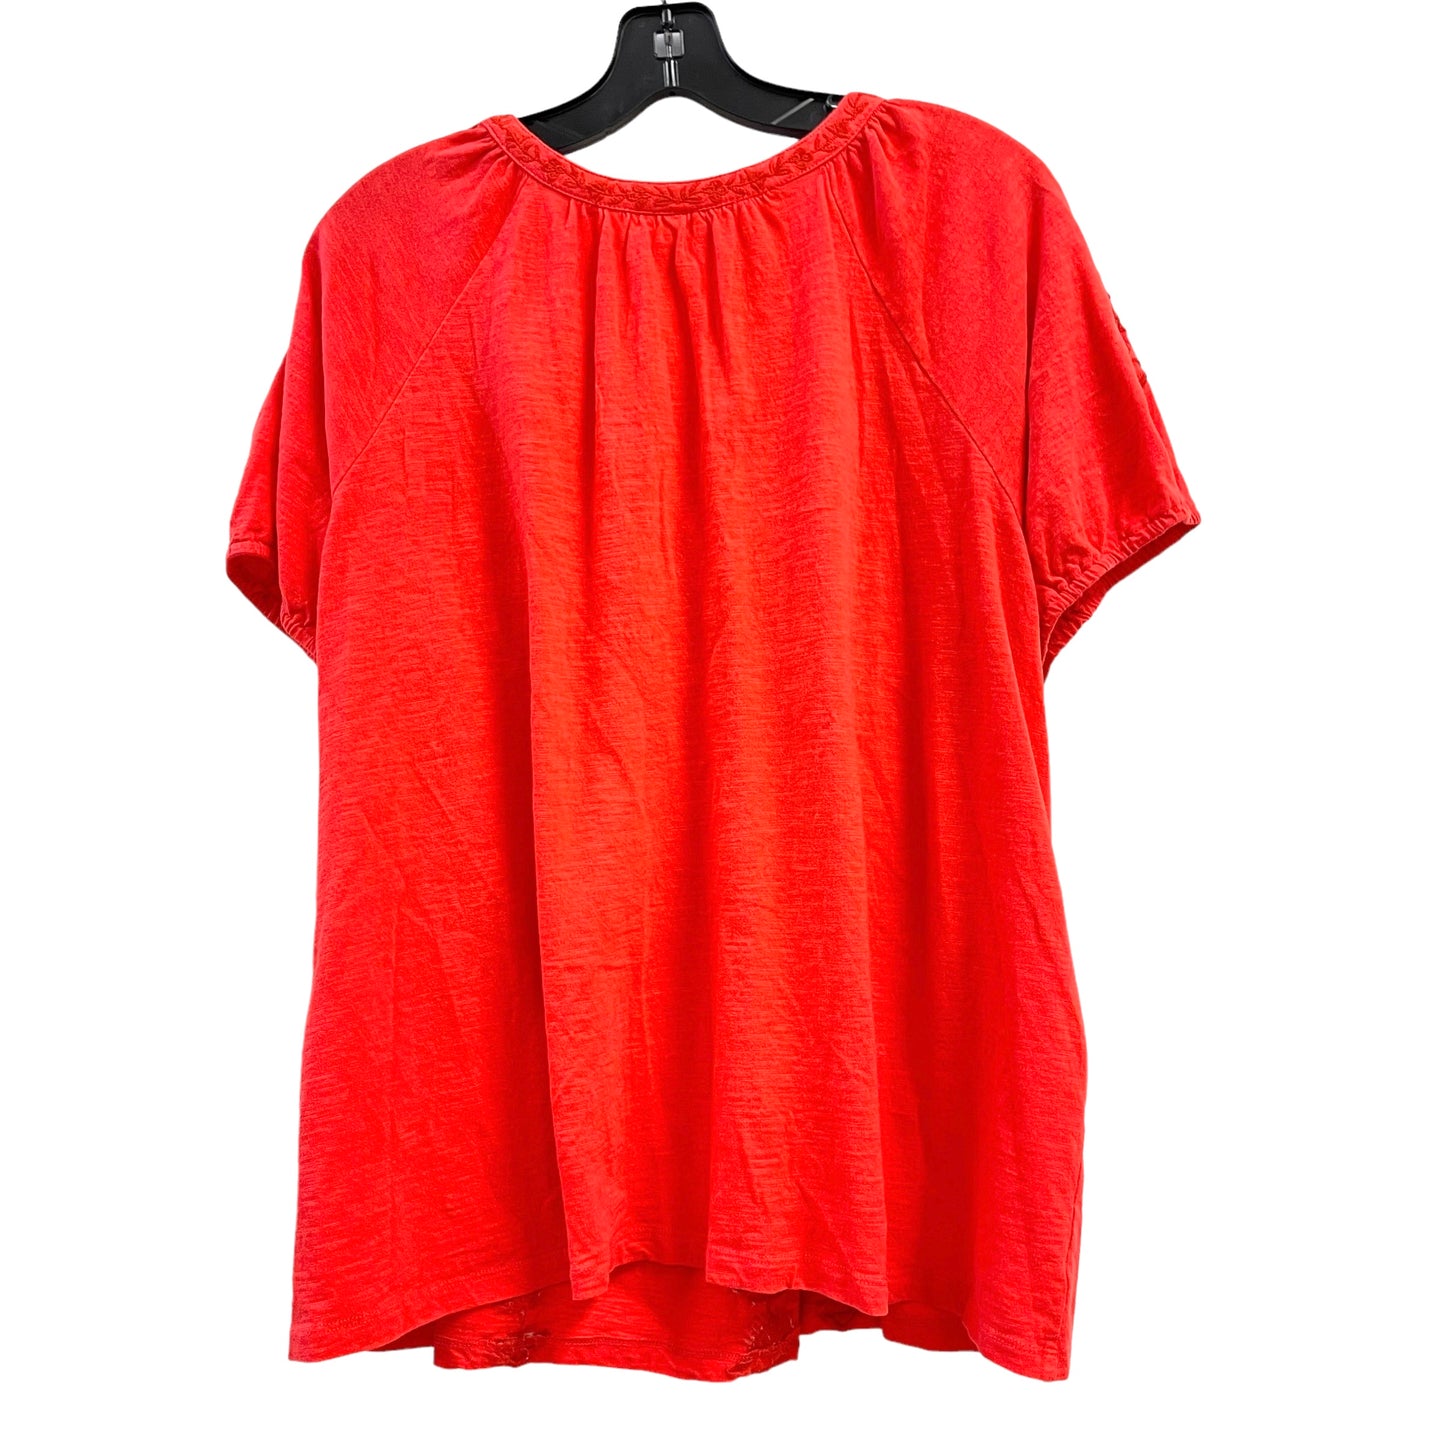 Top Short Sleeve By Style And Company  Size: 2x